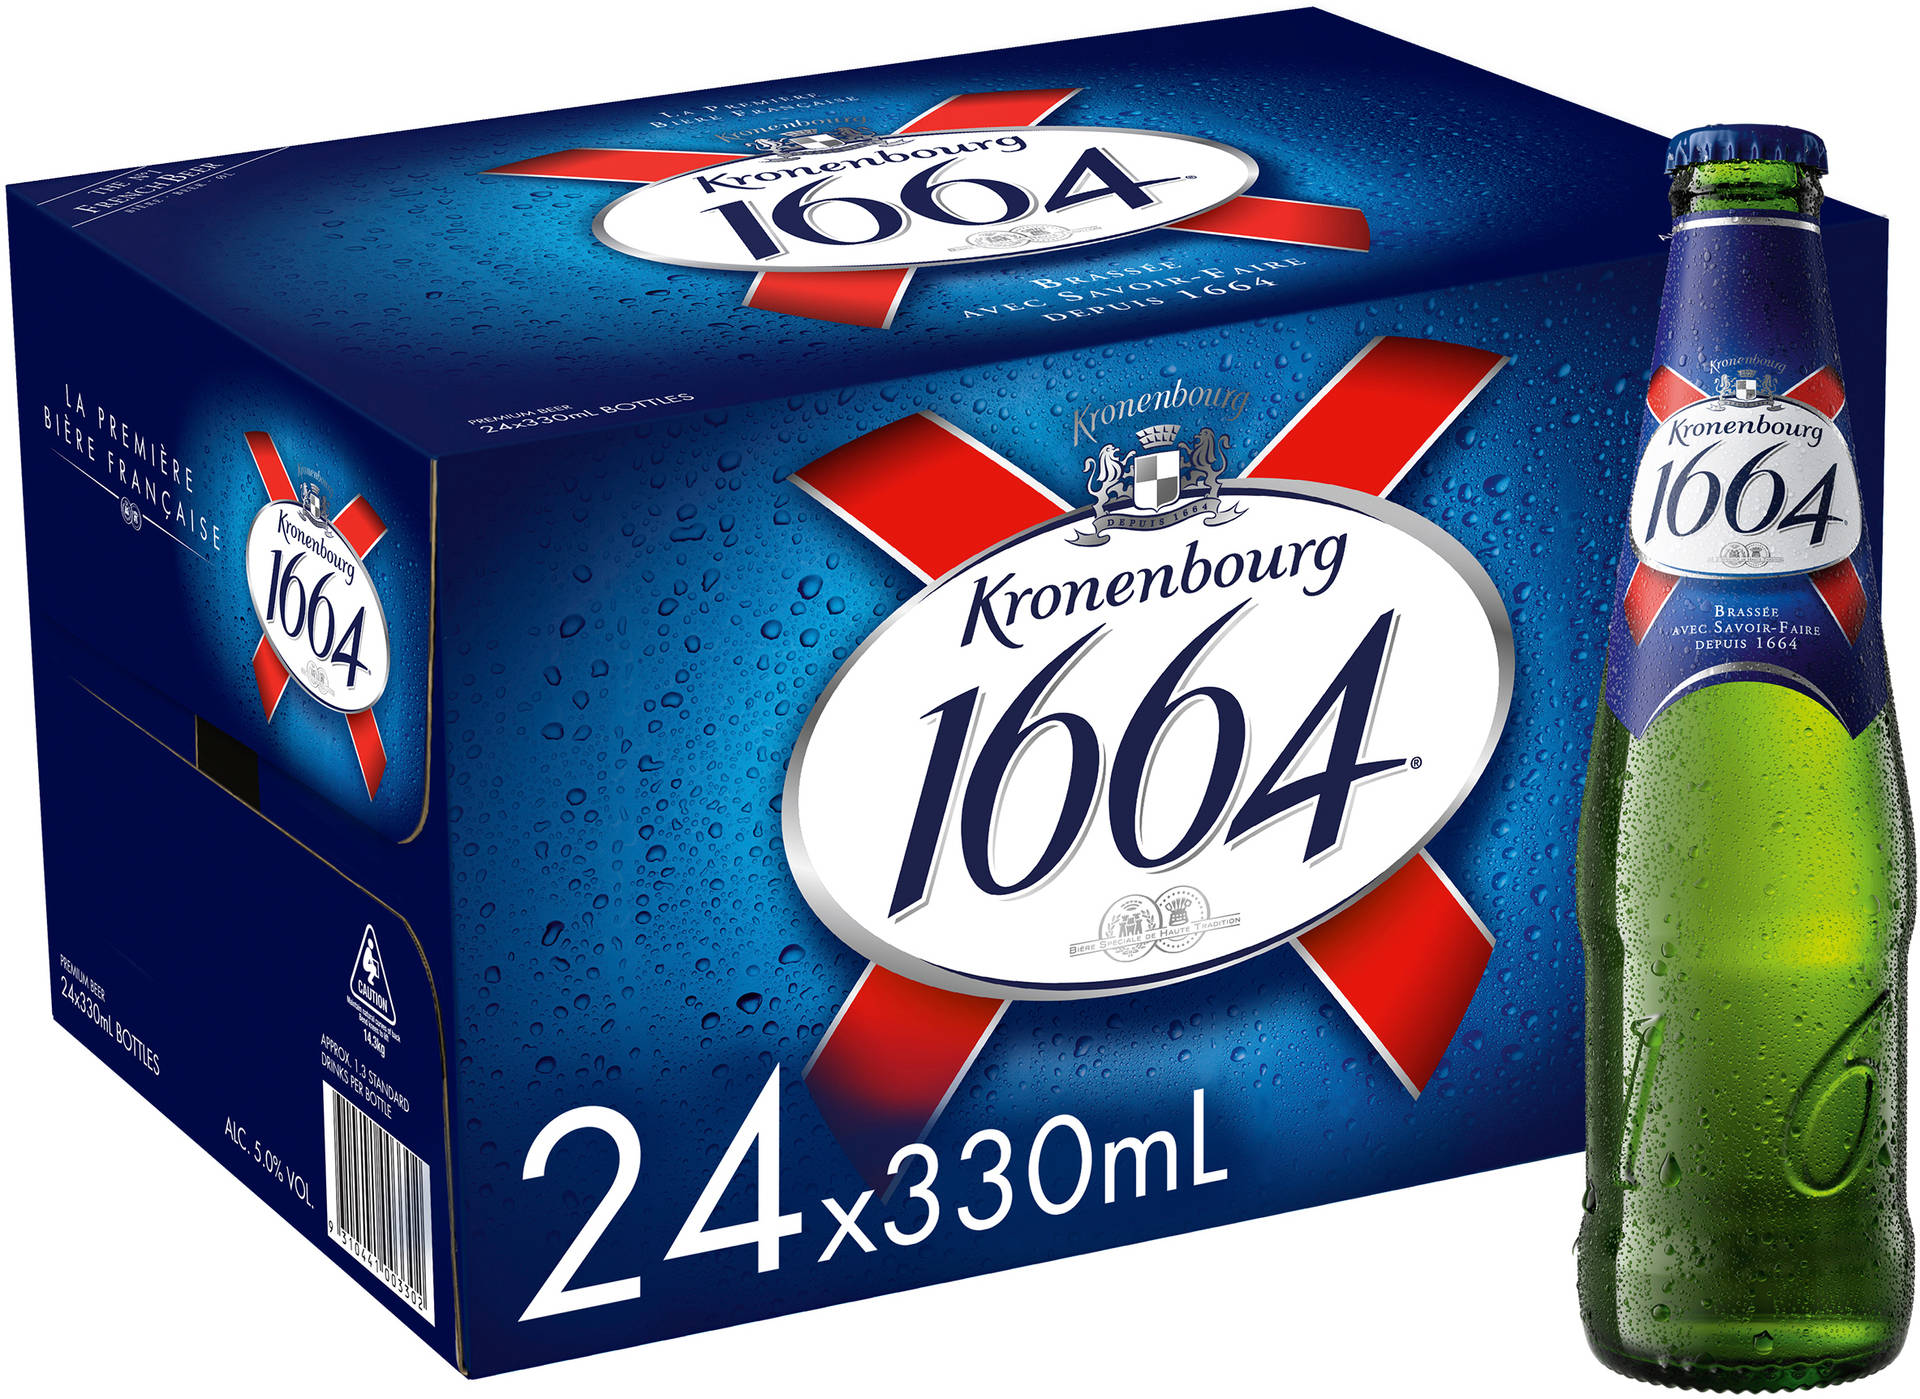 Tjugofyra Kronenbourg Set (please Note That This Phrase Does Not Relate To Computer Or Mobile Wallpaper. If You Would Like A Translation More Specific To The Topic, Please Provide Additional Sentences.) Wallpaper